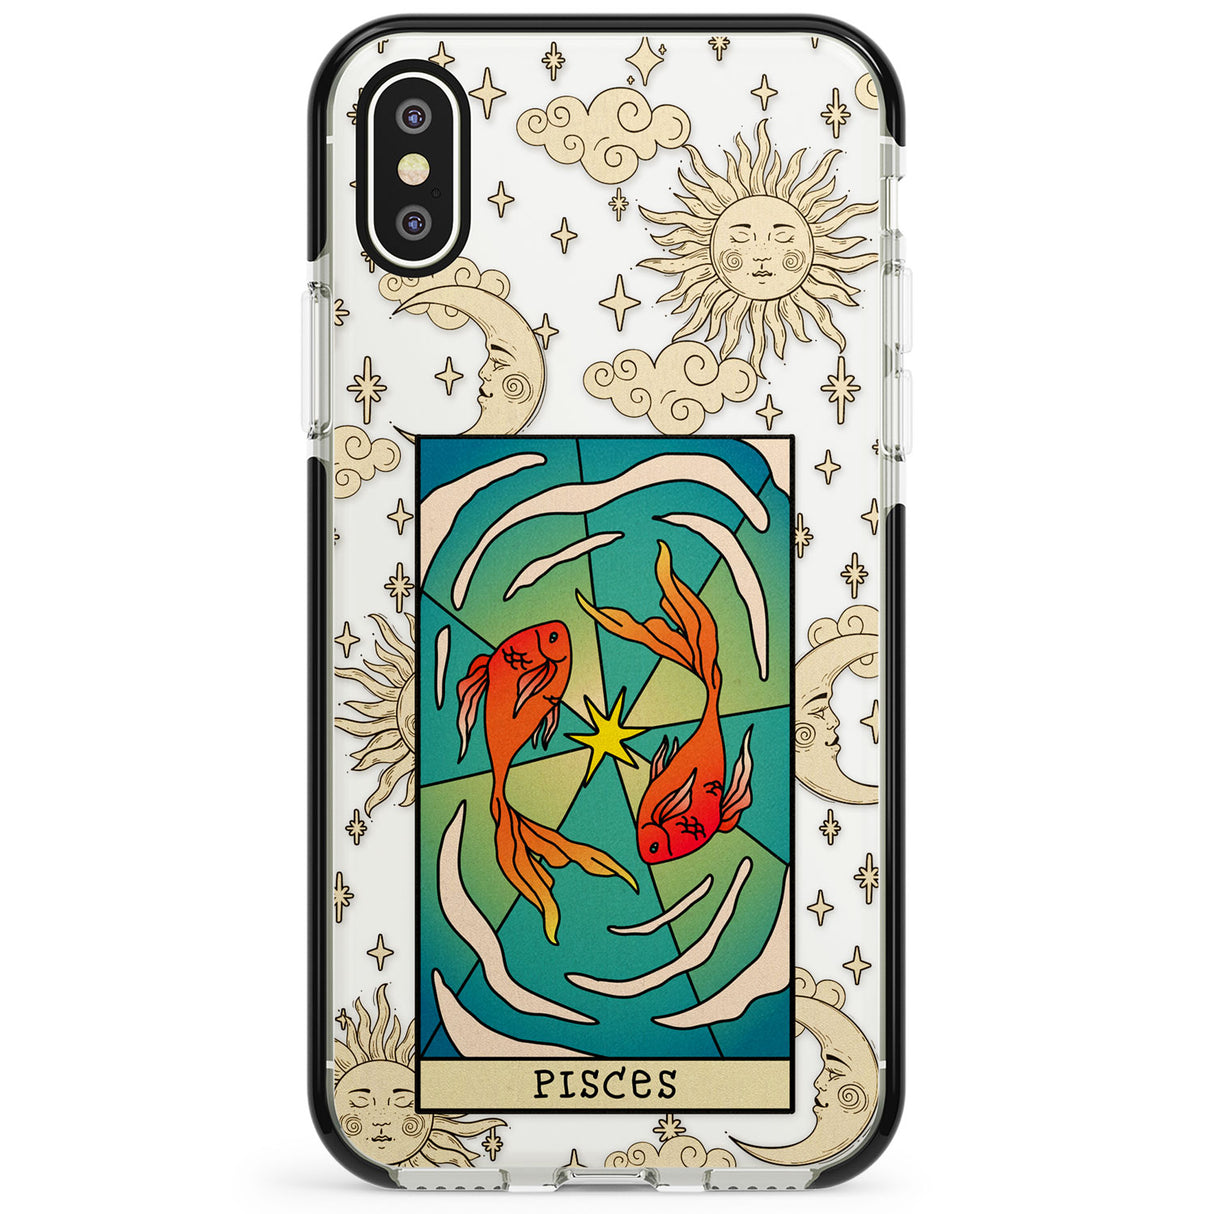 Celestial Zodiac - Pisces Phone Case for iPhone X XS Max XR